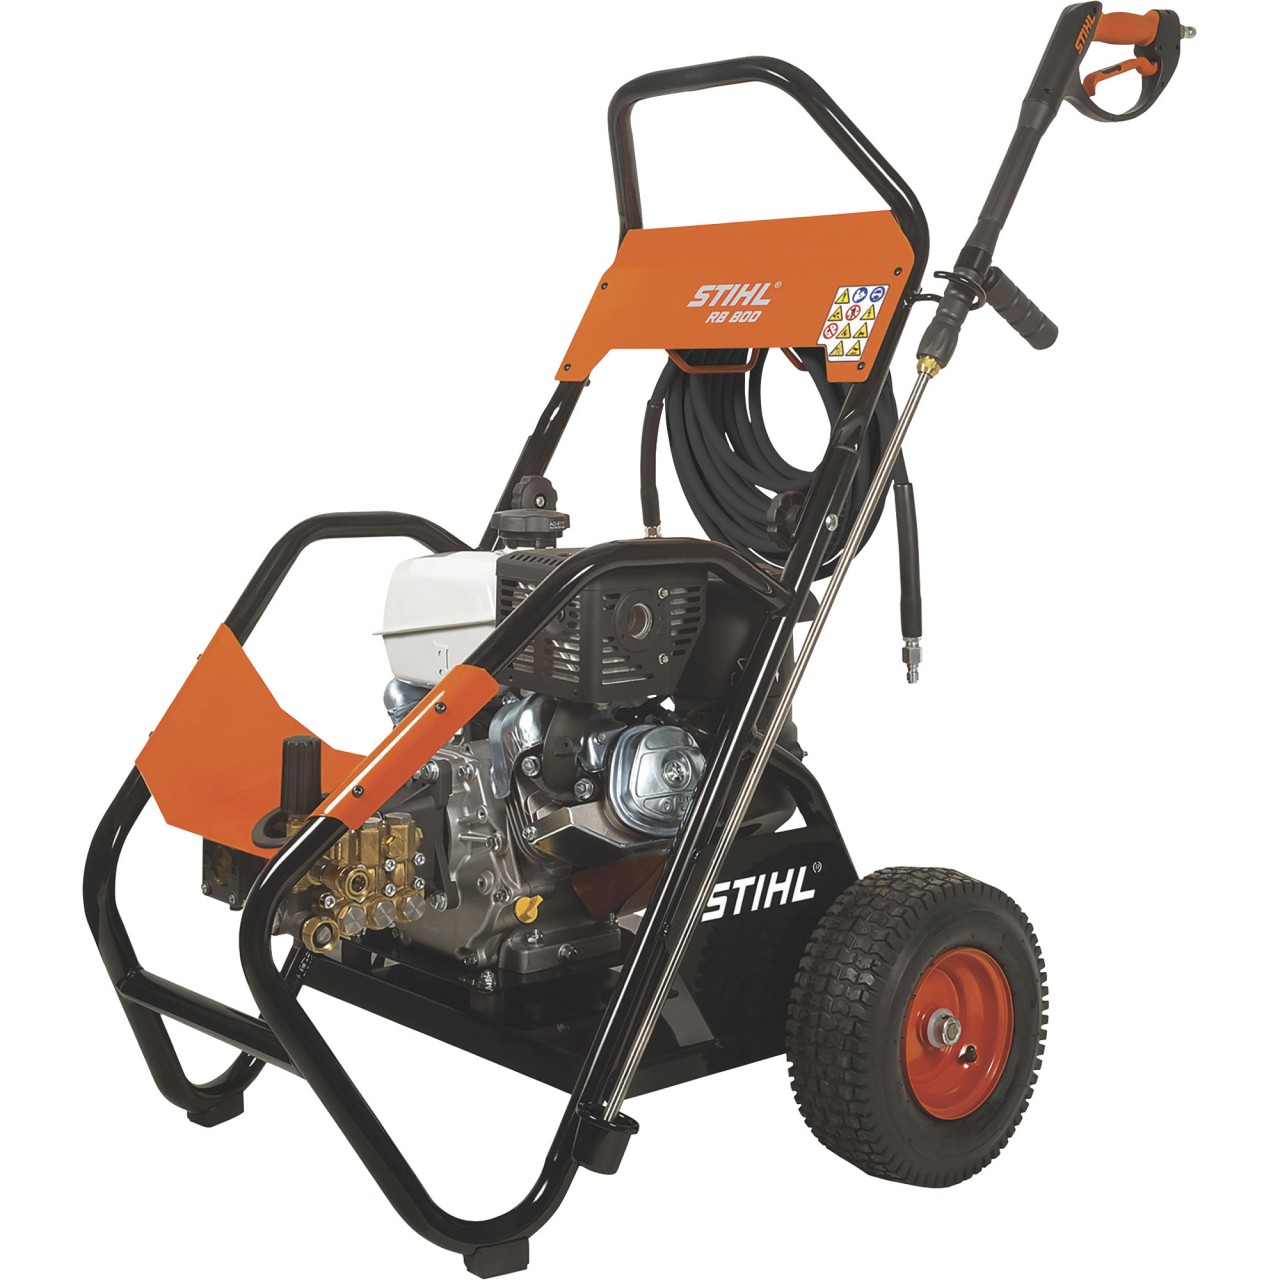 Stihl Rb 200 Pressure Washer How To Start Stihl Professional Gas Cold Water Pressure Washer — 4200 PSI, 4.0 GPM,  Model# RB 800